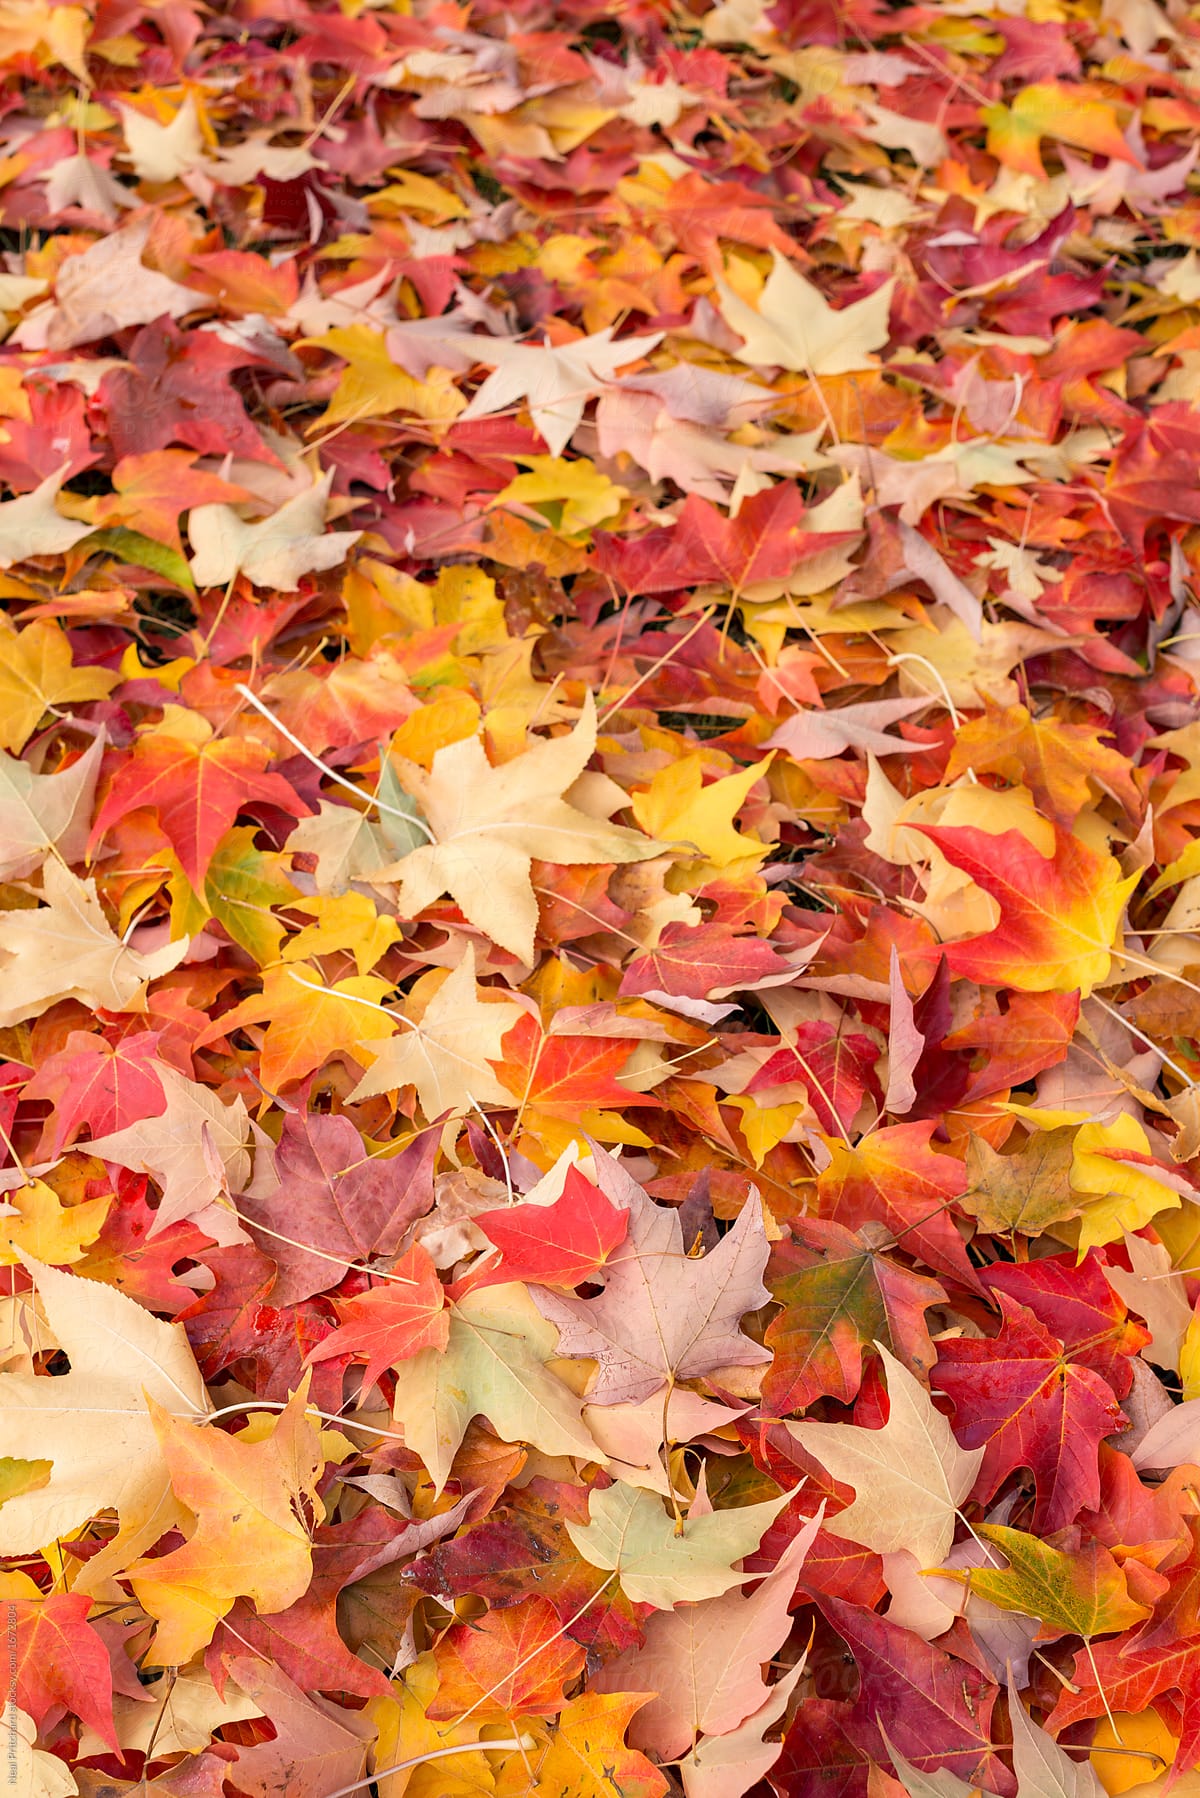 Autumn Leaves On Forest Floor By Stocksy Contributor Neal Pritchard